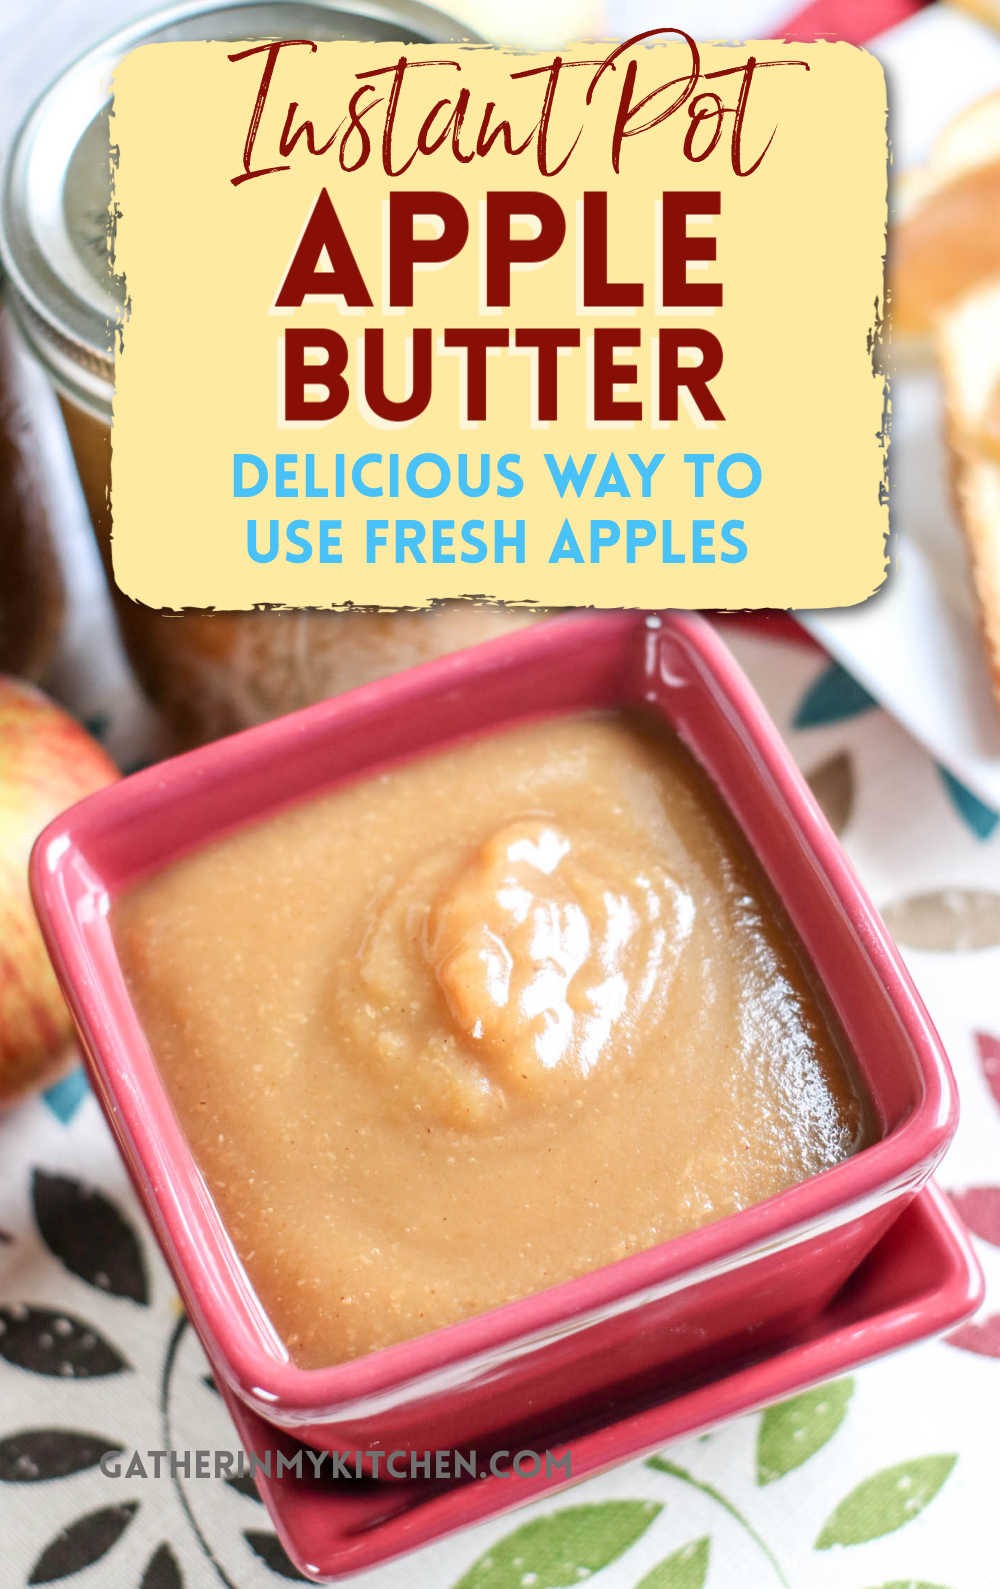 Pin image: apple butter in bowl with the words "Instant Pot Apple Butter delicious way to use fresh apples".